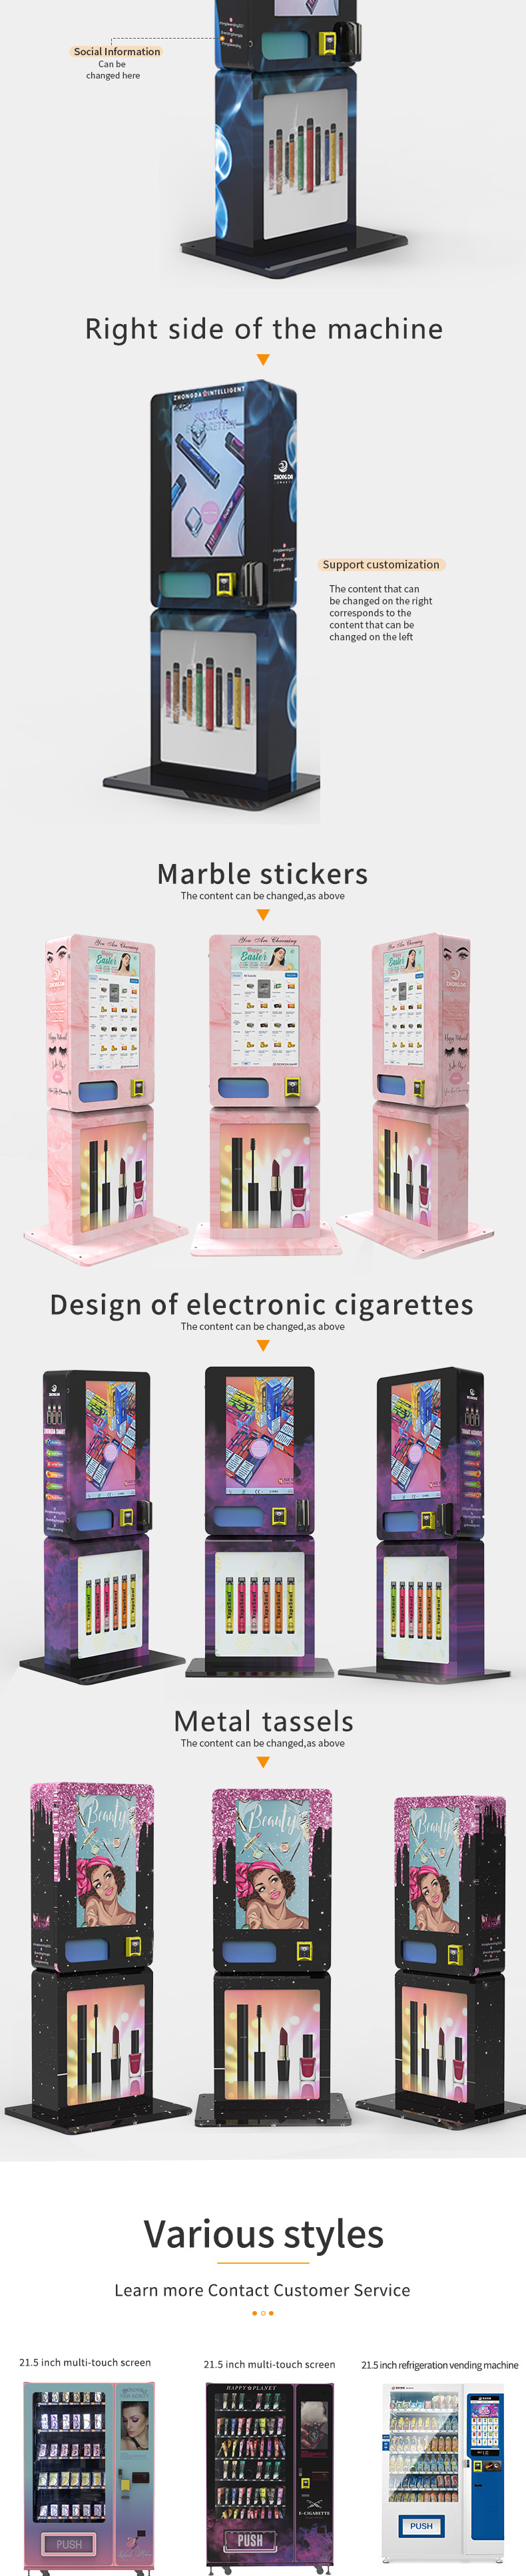 32-inch vertical vape vending machine with age verification